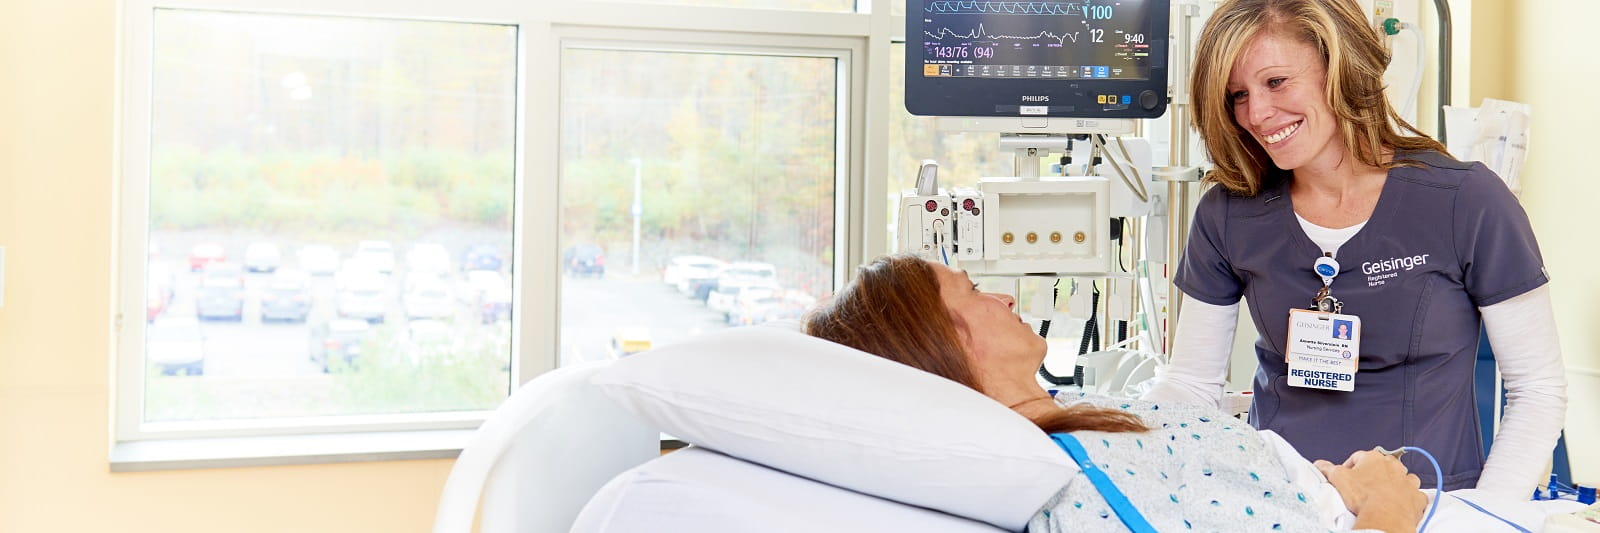 Healthcare provider smiling at patient laying in bed near window